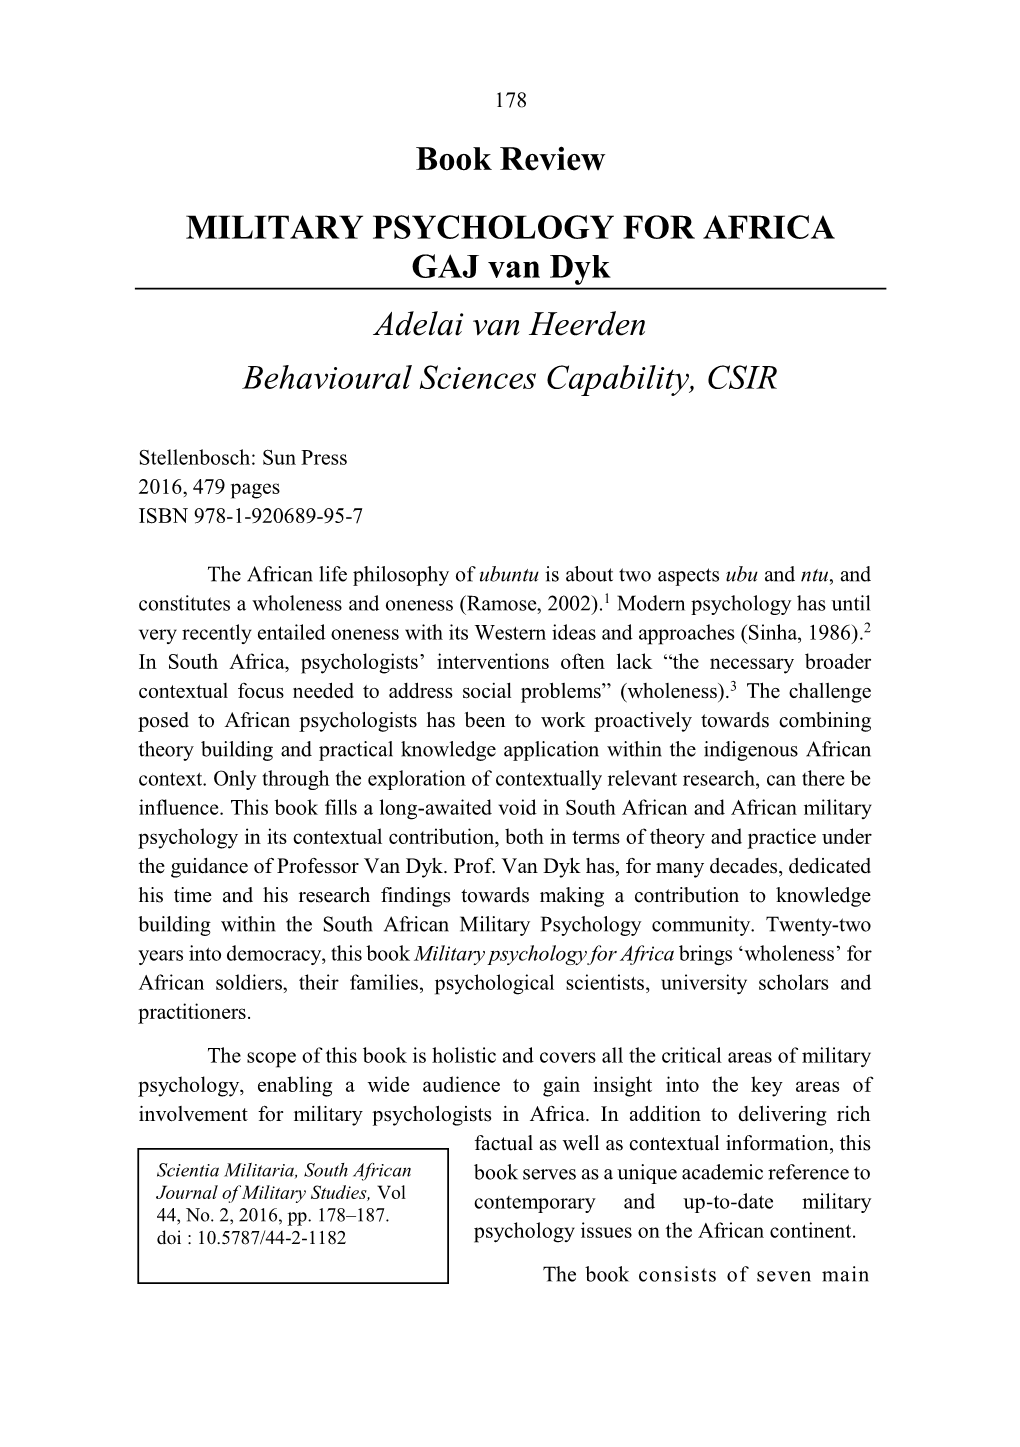 Book Review: Military Psychology for Africa